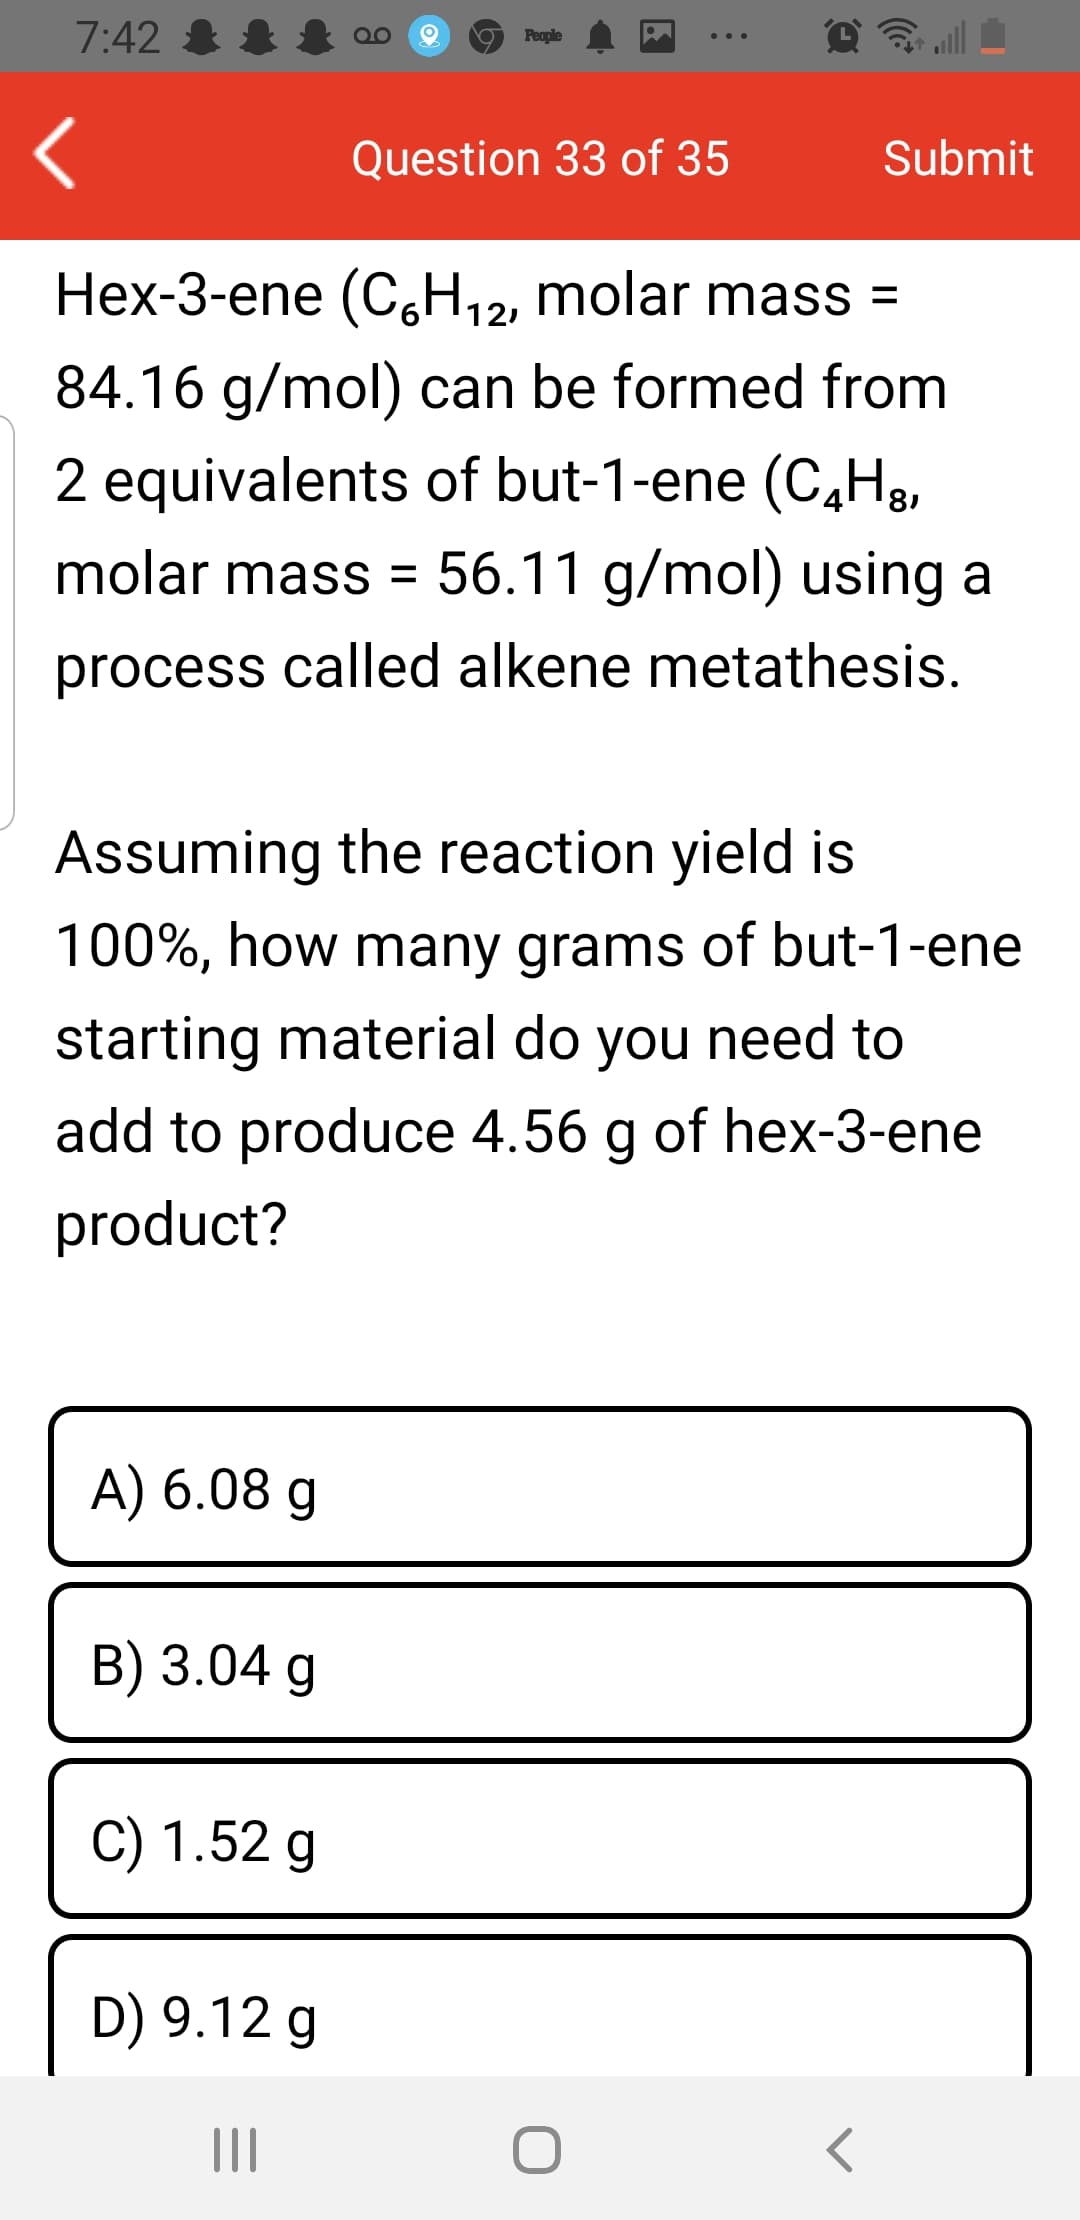 7:42 &
People
Question 33 of 35
Submit
Hex-3-ene (C,H,2, molar mass =
121
84.16 g/mol) can be formed from
2 equivalents of but-1-ene (C,H3,
molar mass = 56.11 g/mol) using a
process called alkene metathesis.
Assuming the reaction yield is
100%, how many grams of but-1-ene
starting material do you need to
add to produce 4.56 g of hex-3-ene
product?
A) 6.08 g
B) 3.04 g
C) 1.52 g
D) 9.12 g
